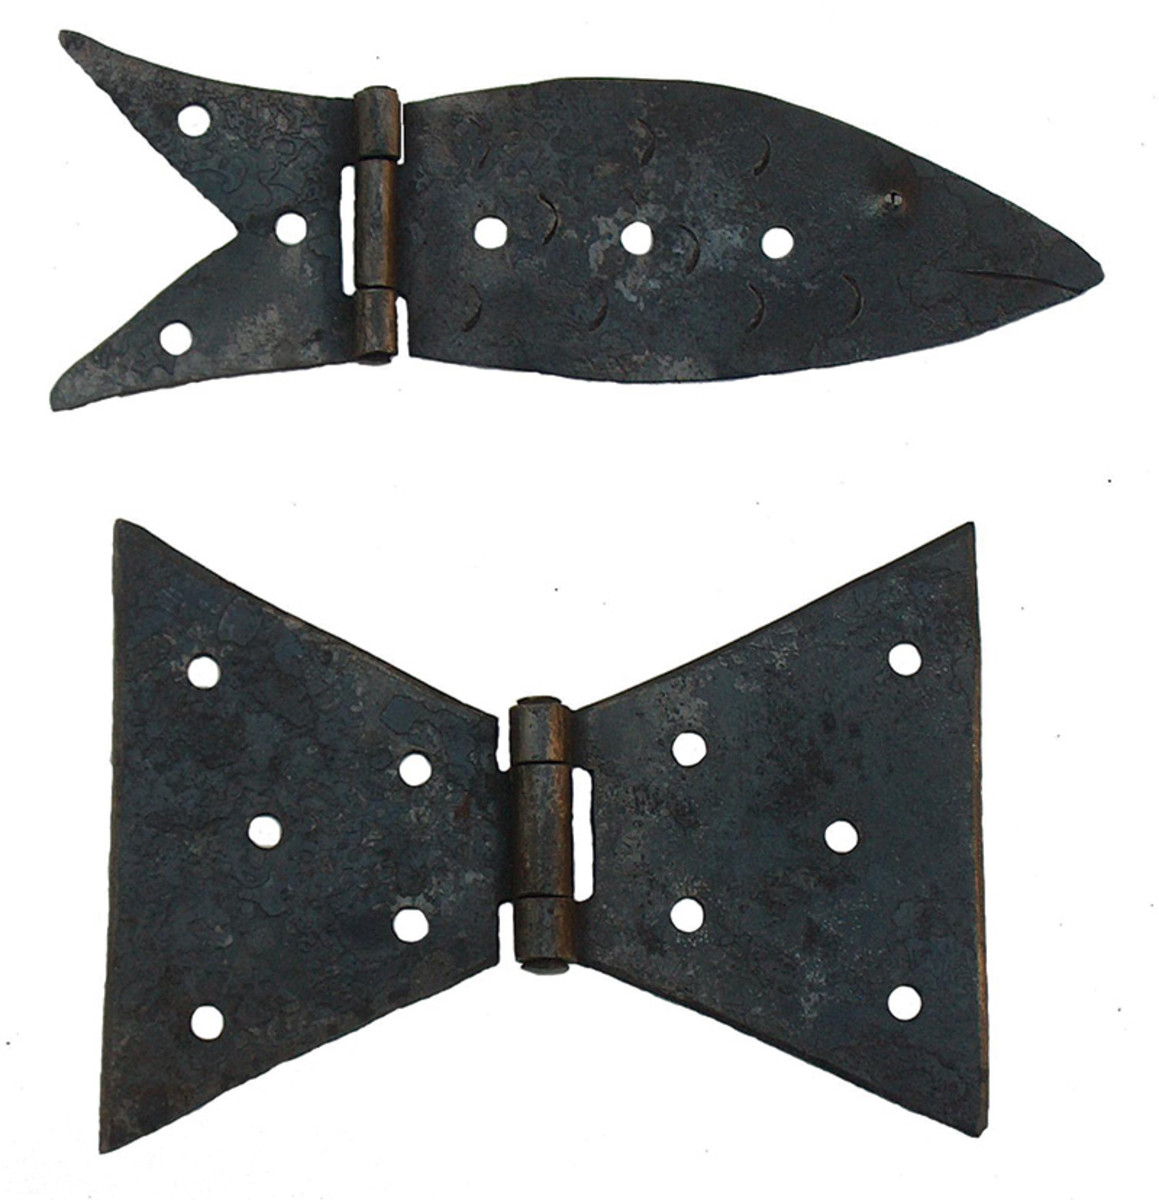 hand-forged hinges